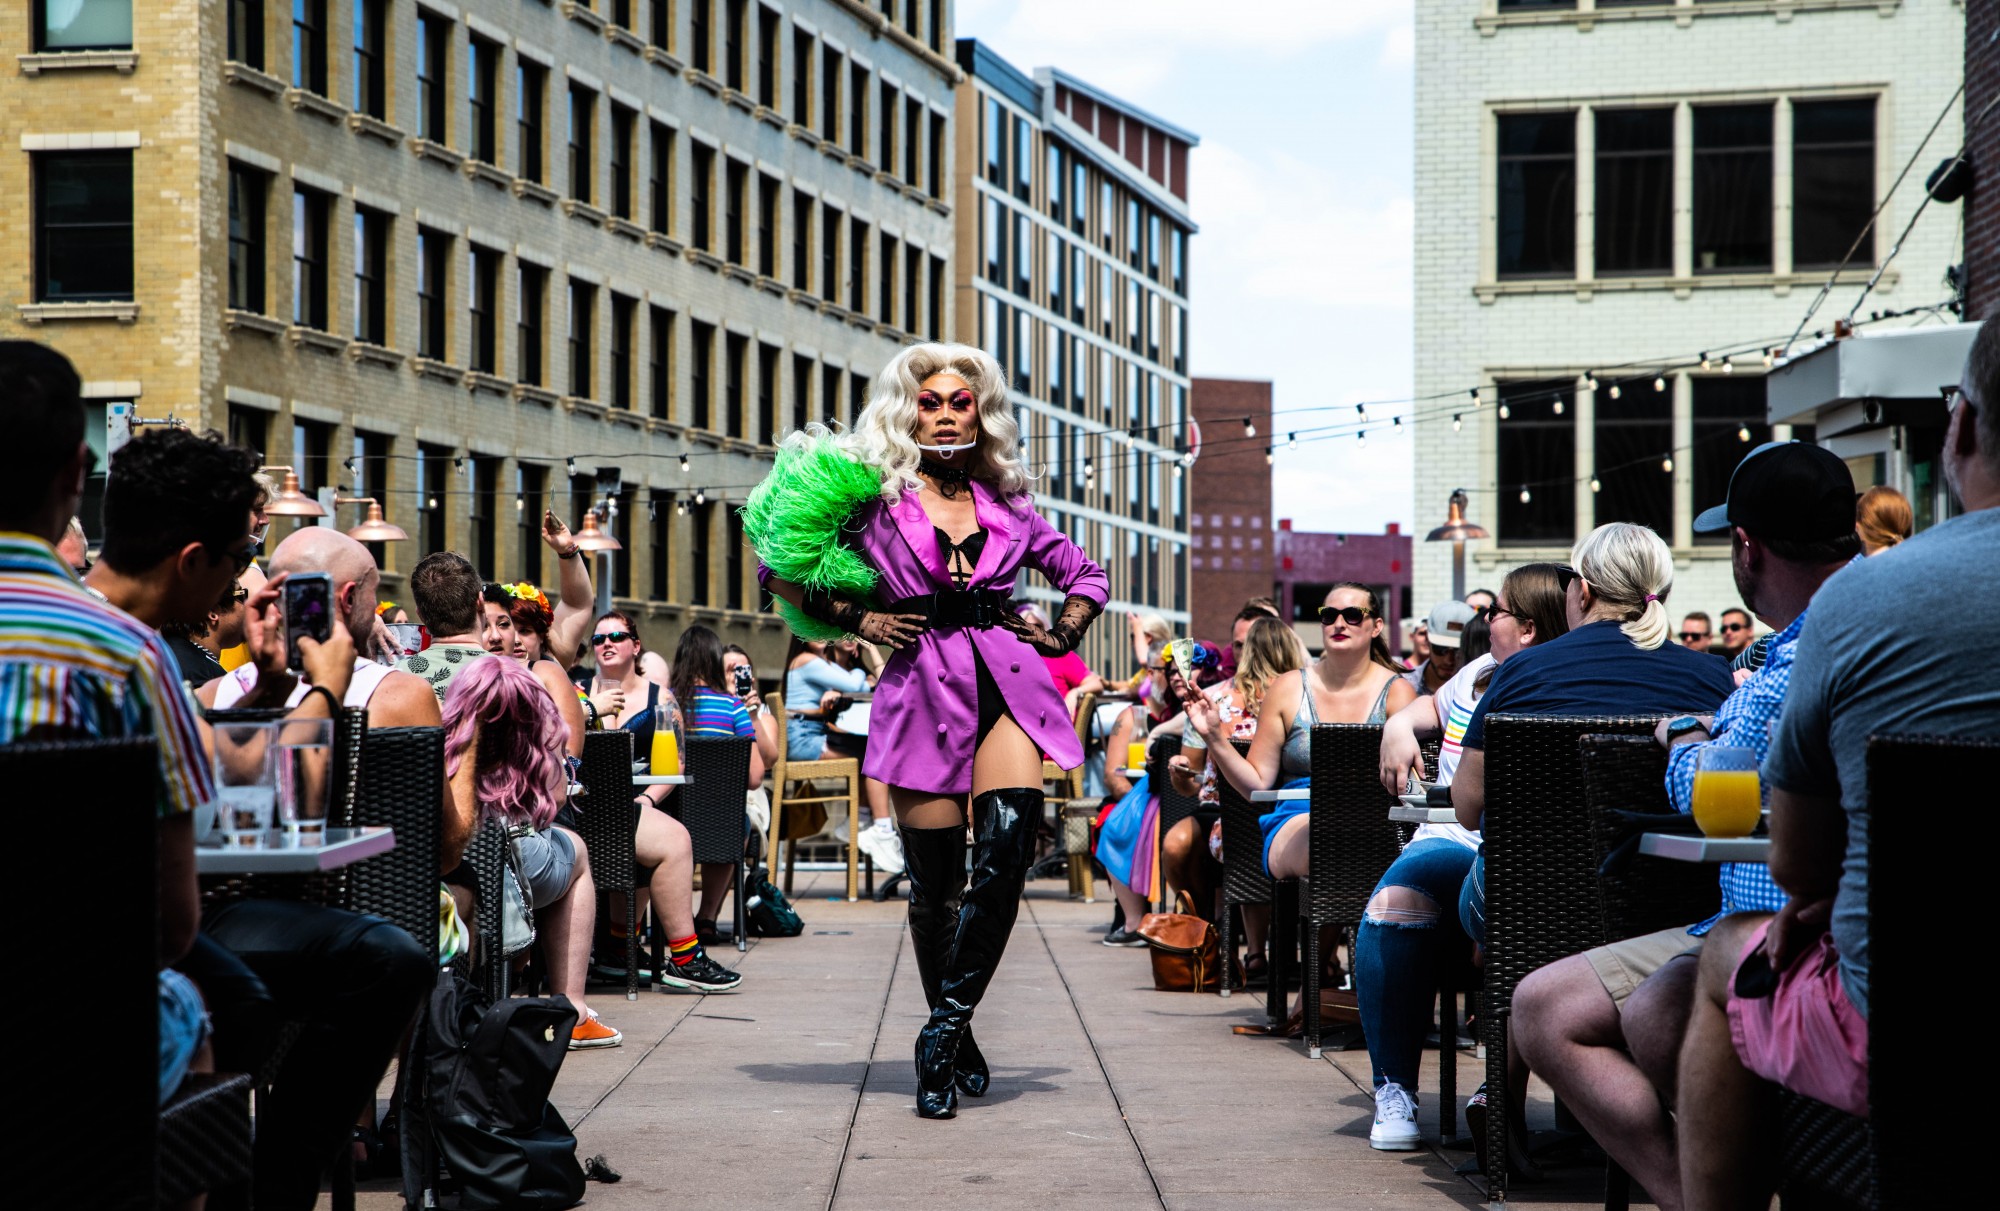 Julia Starr performs at the Pride Drag Brunch at Union Rooftop on Saturday, June 27. With the venue at half-capacity and with face masks required for all patrons, the celebration of Pride continued amidst the COVID-19 pandemic.